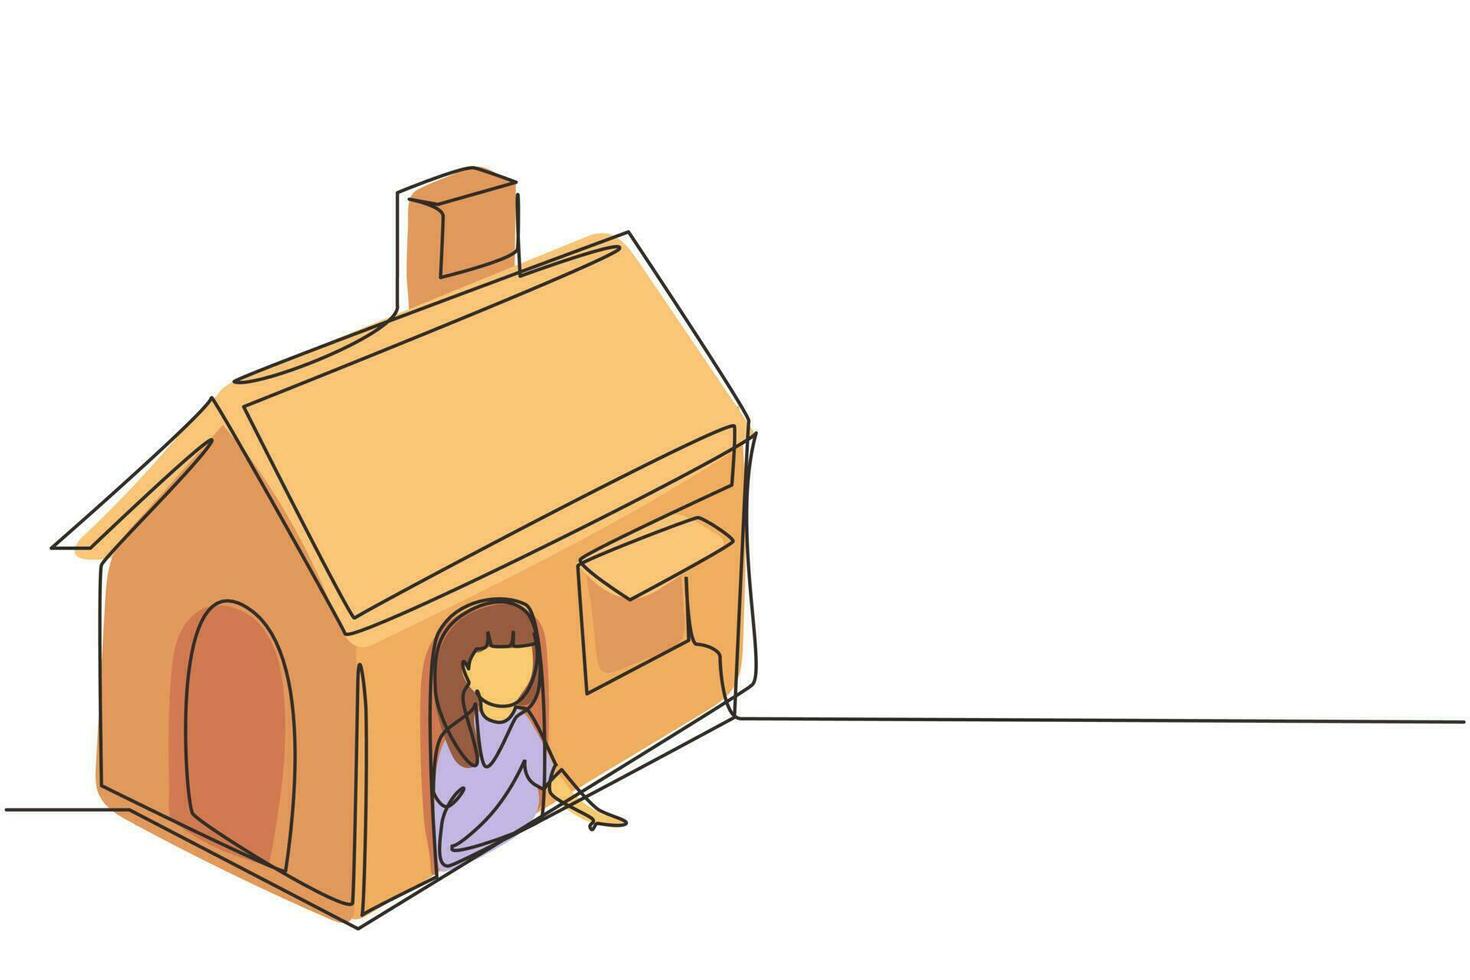 Single continuous line drawing cute little girl playing in house made of cardboard boxes. Creative child sitting in playhouse. Leisure time. Dynamic one line draw graphic design vector illustration